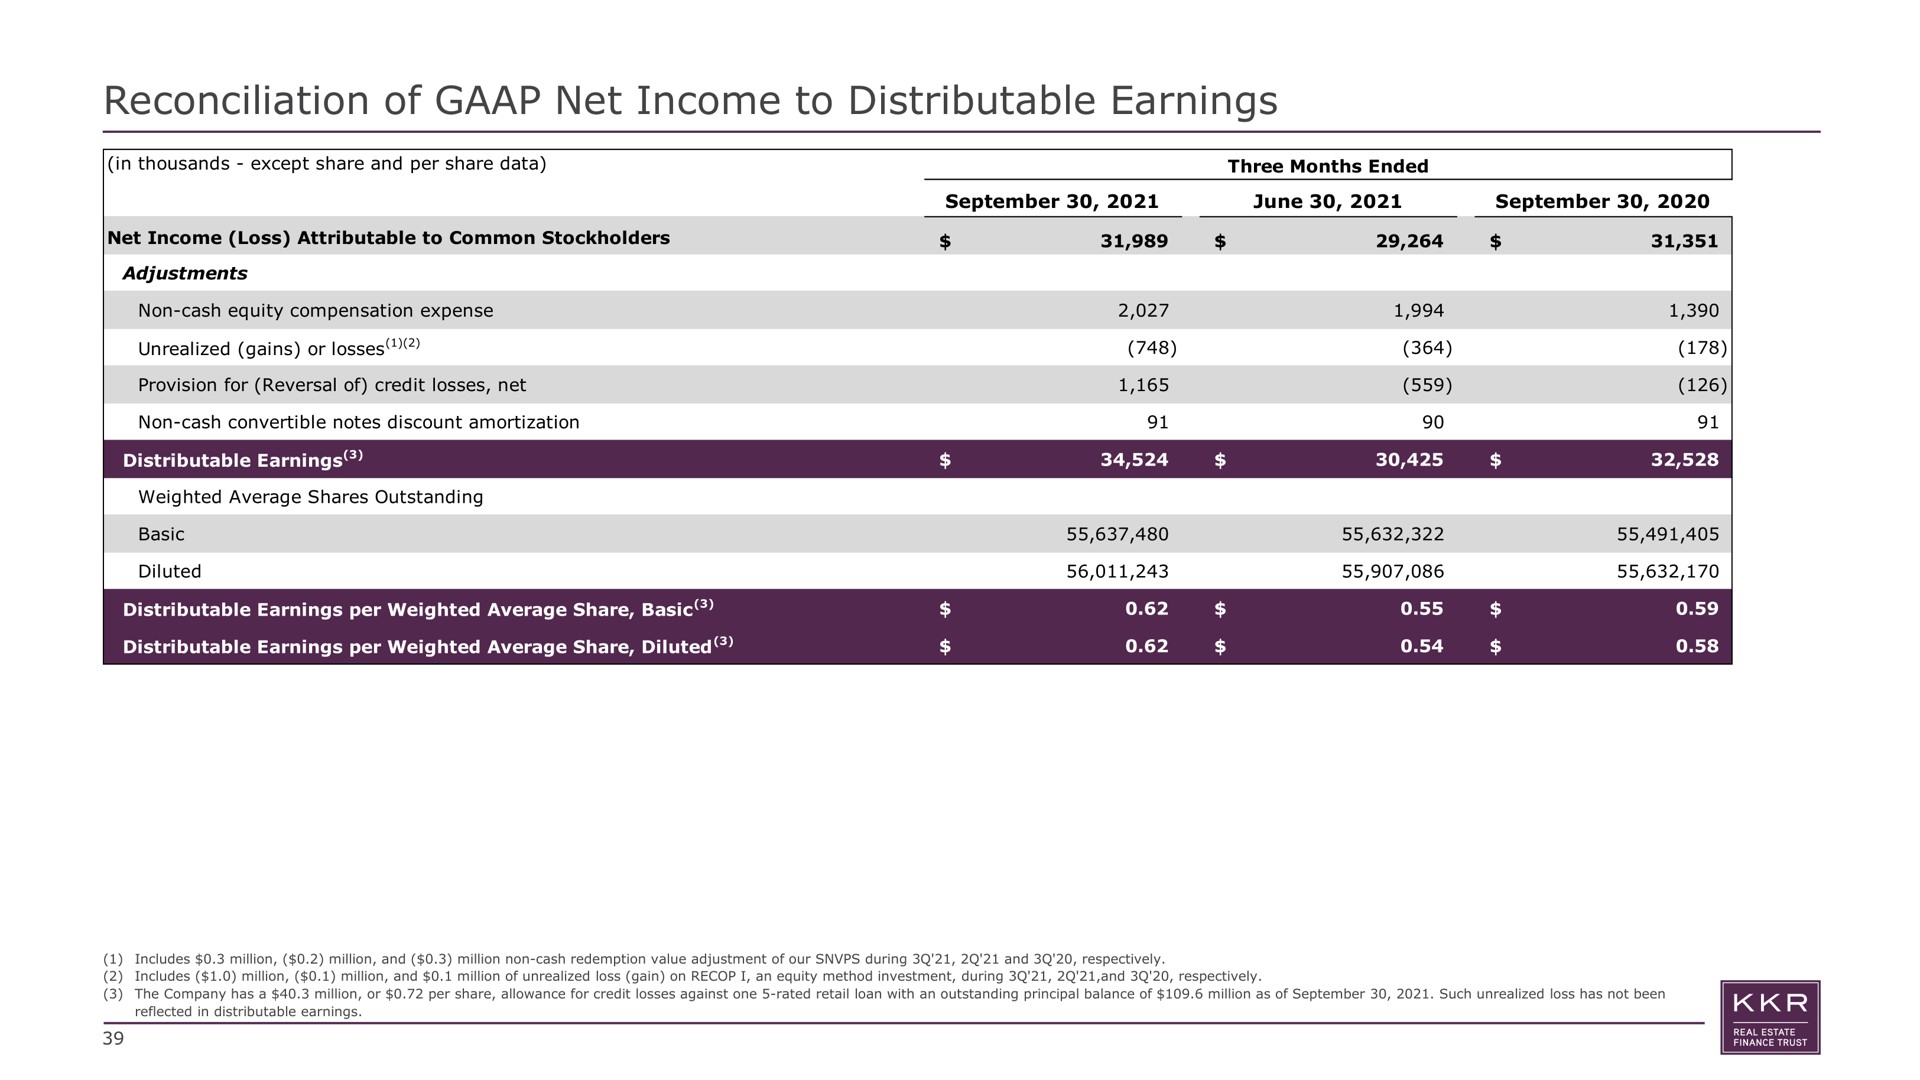 reconciliation of net income to distributable earnings basic | KKR Real Estate Finance Trust